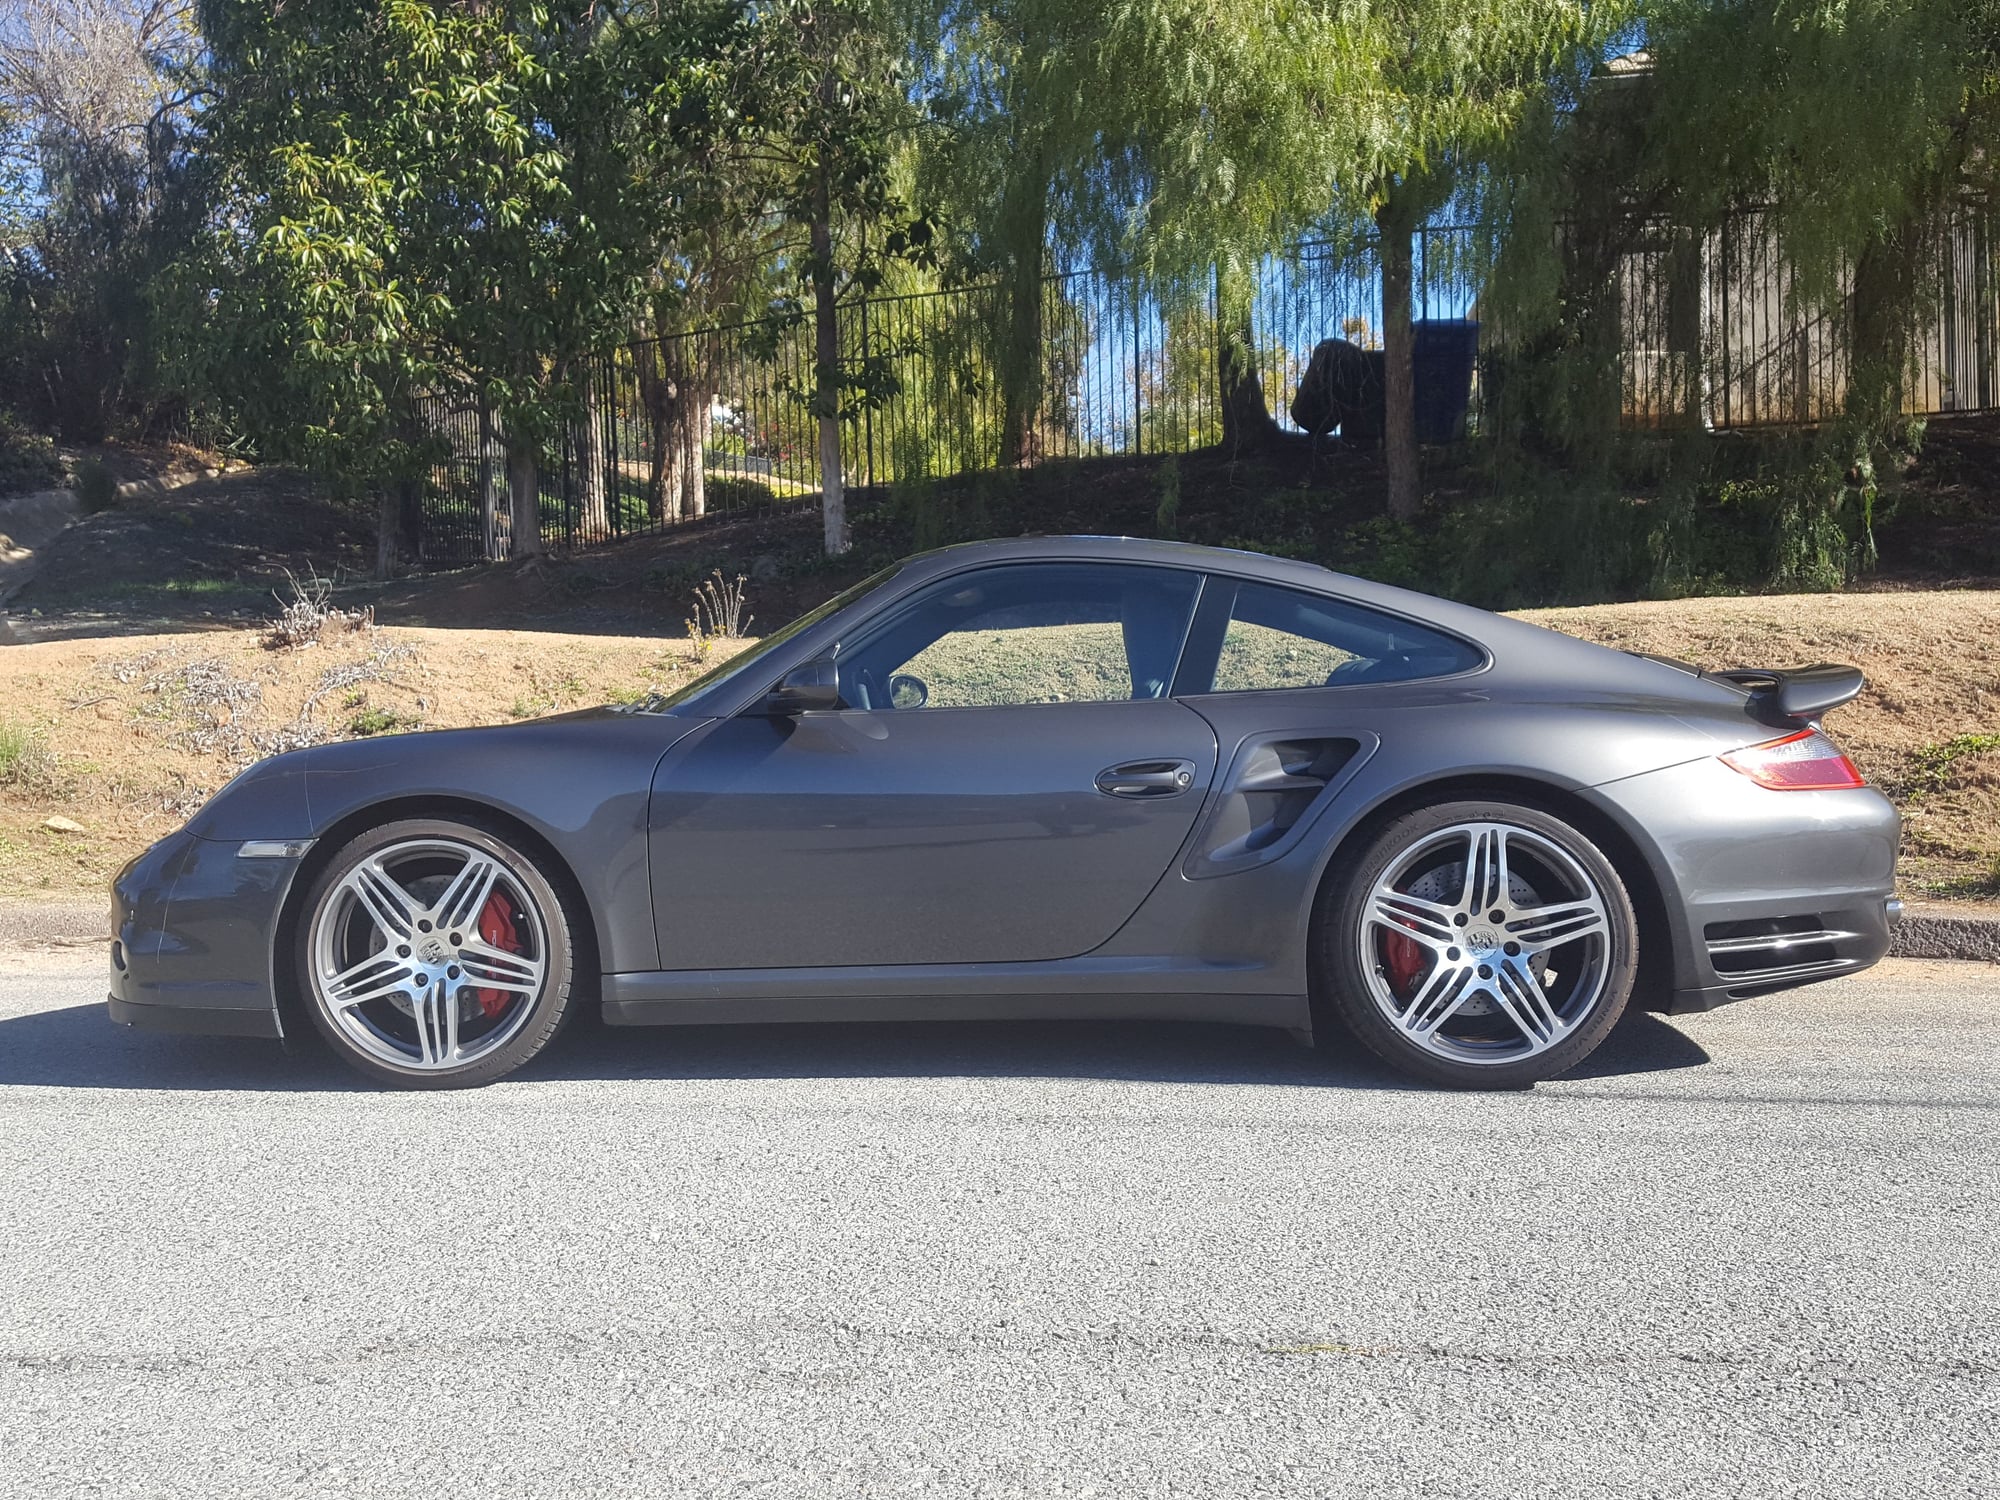 2007 Porsche 911 - 2007 911 TT for sale - Used - VIN WPOAD29907S785639 - 78,500 Miles - 6 cyl - AWD - Automatic - Coupe - Gray - San Diego, CA 92064, United States